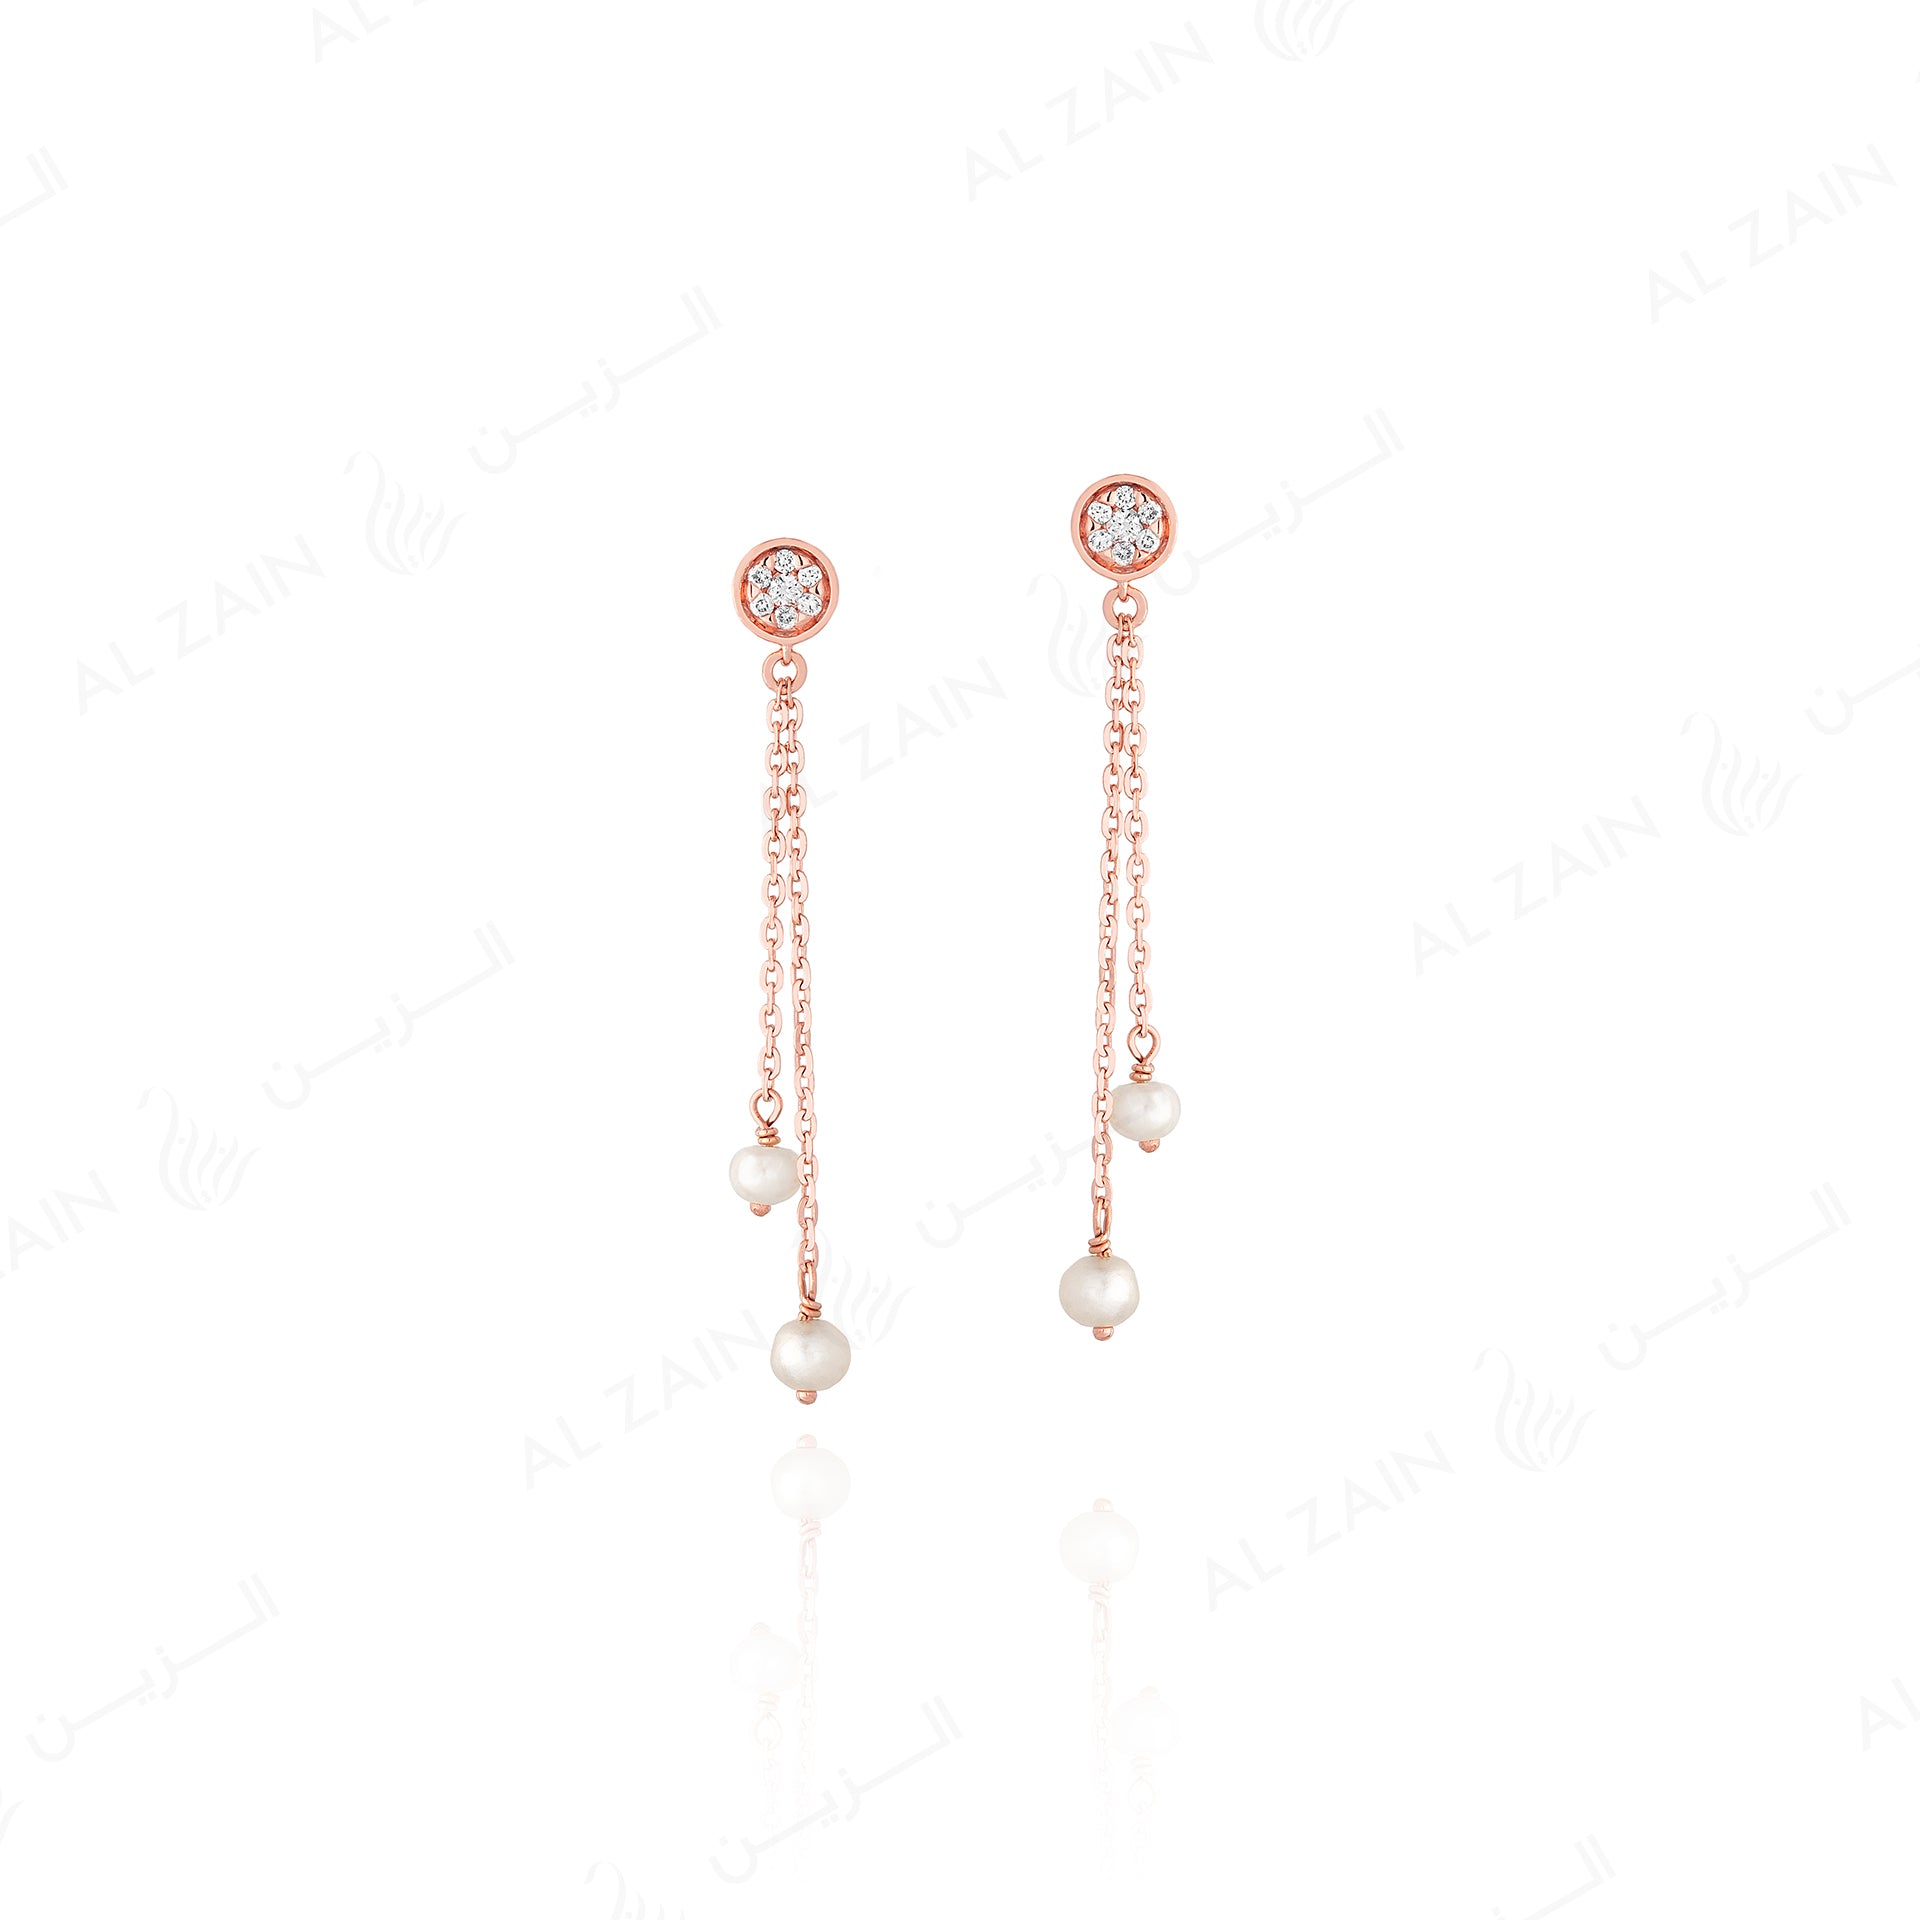 Natural Pearl Earrings in Rose gold with Diamonds